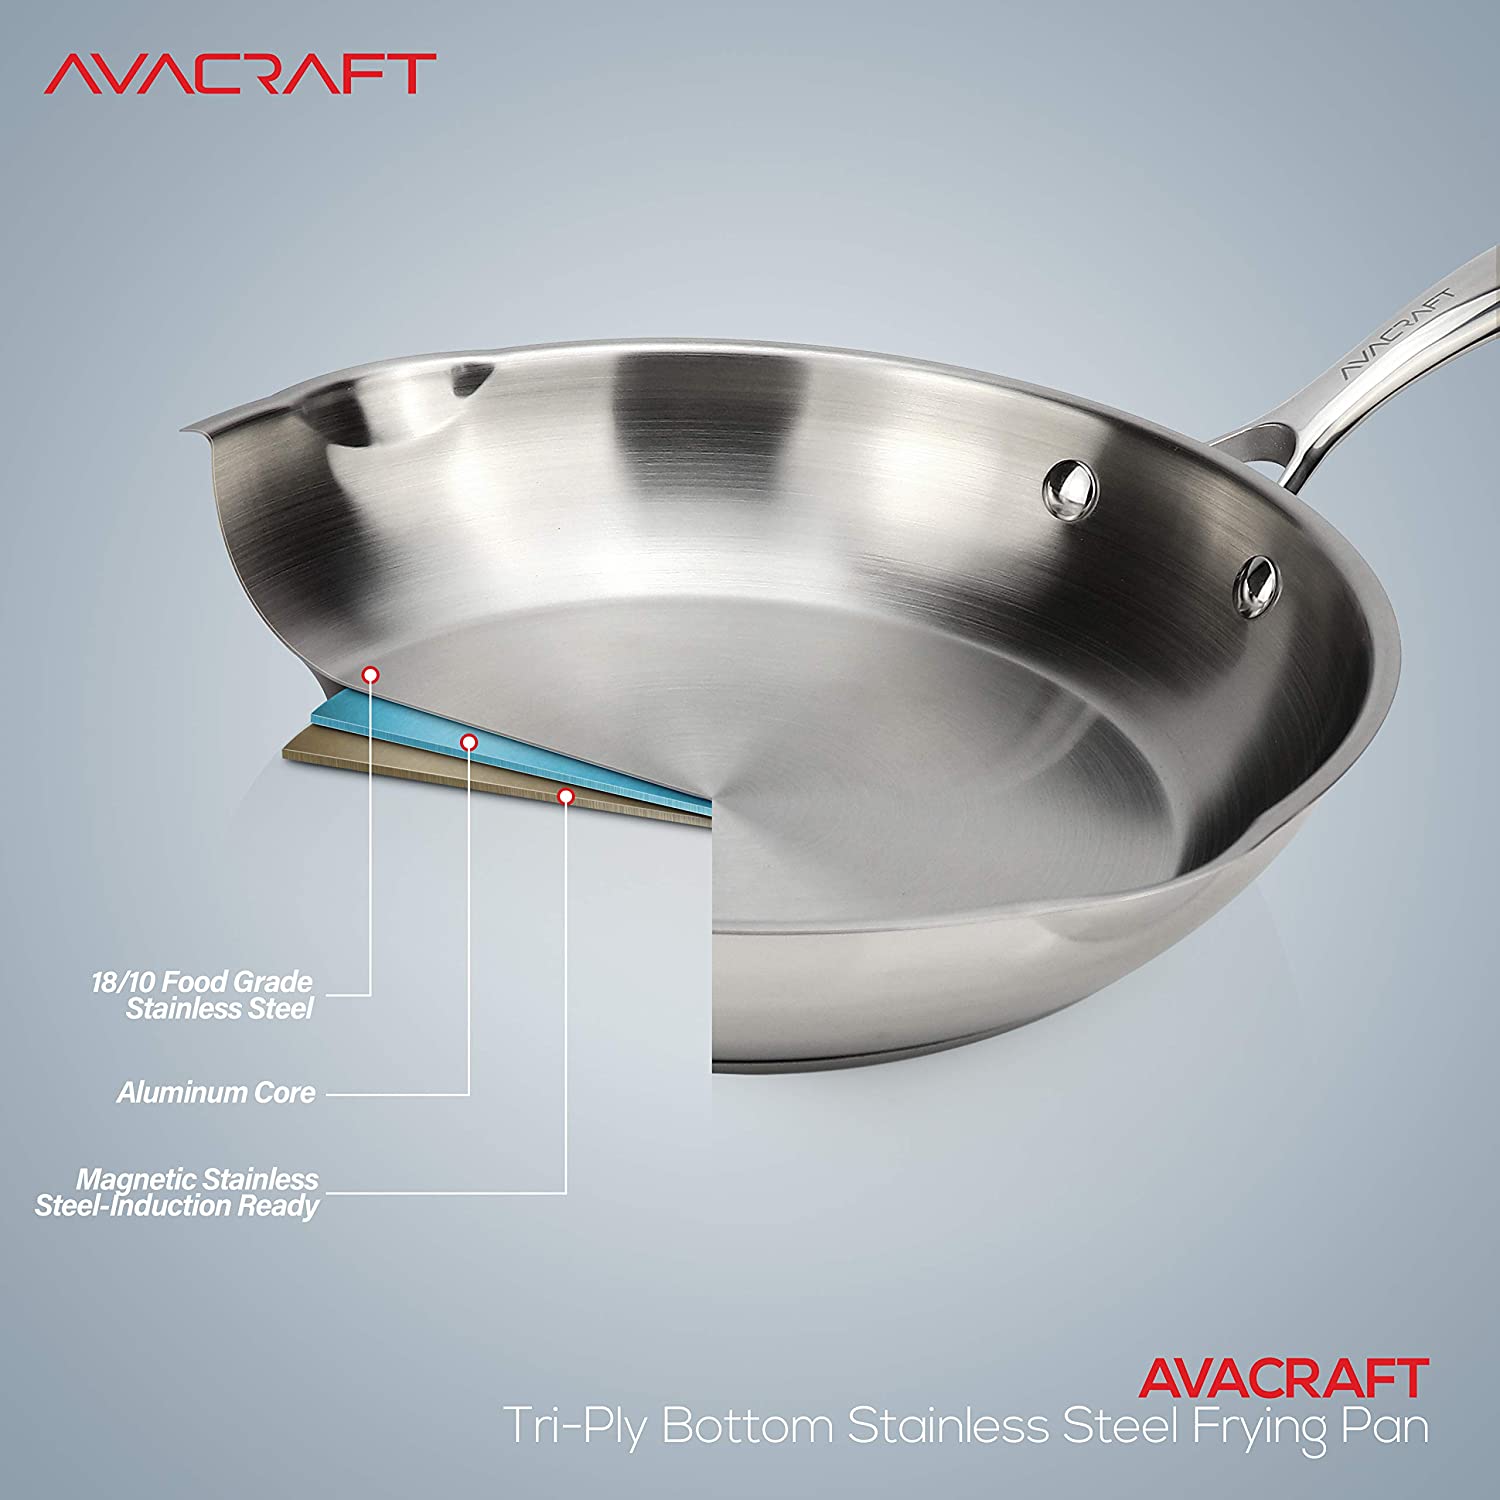 AVACRAFT 18/10 Stainless Steel Frying Pan with Lid and Side Spouts (Five-Ply Capsule Bottom, 10 Inch)